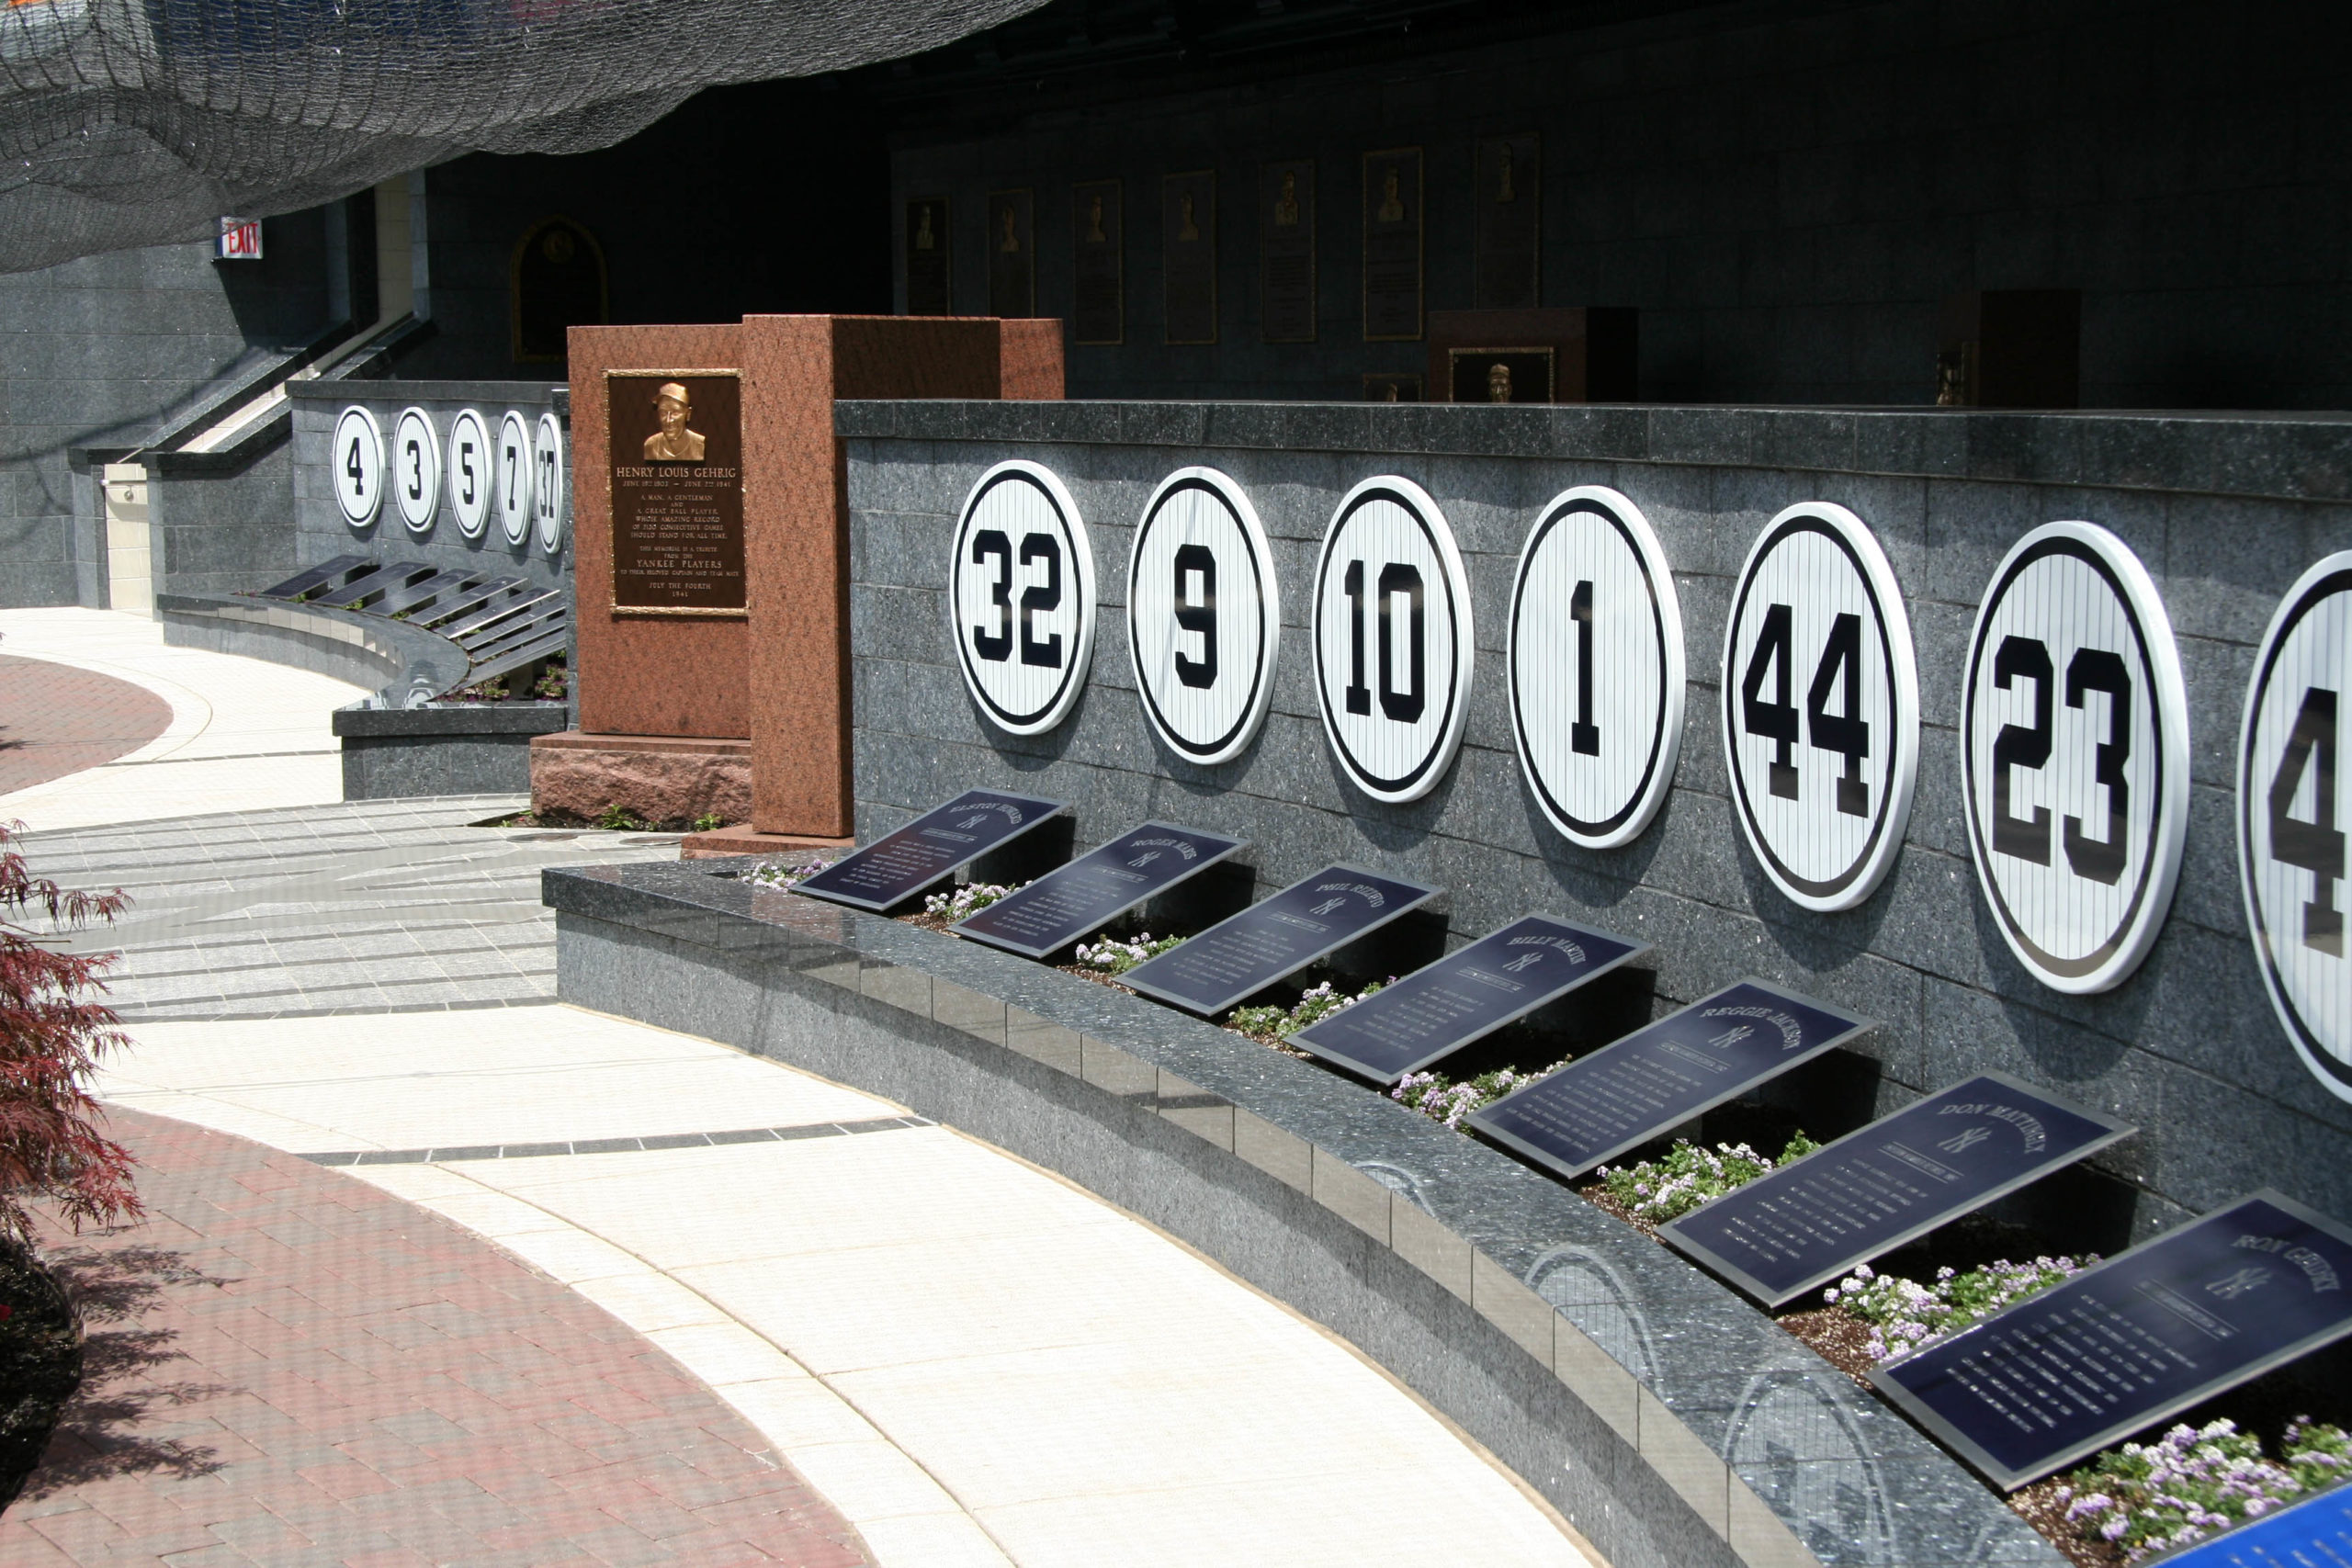 Have the Yankees taken retired numbers too far?, Bronx Pinstripes